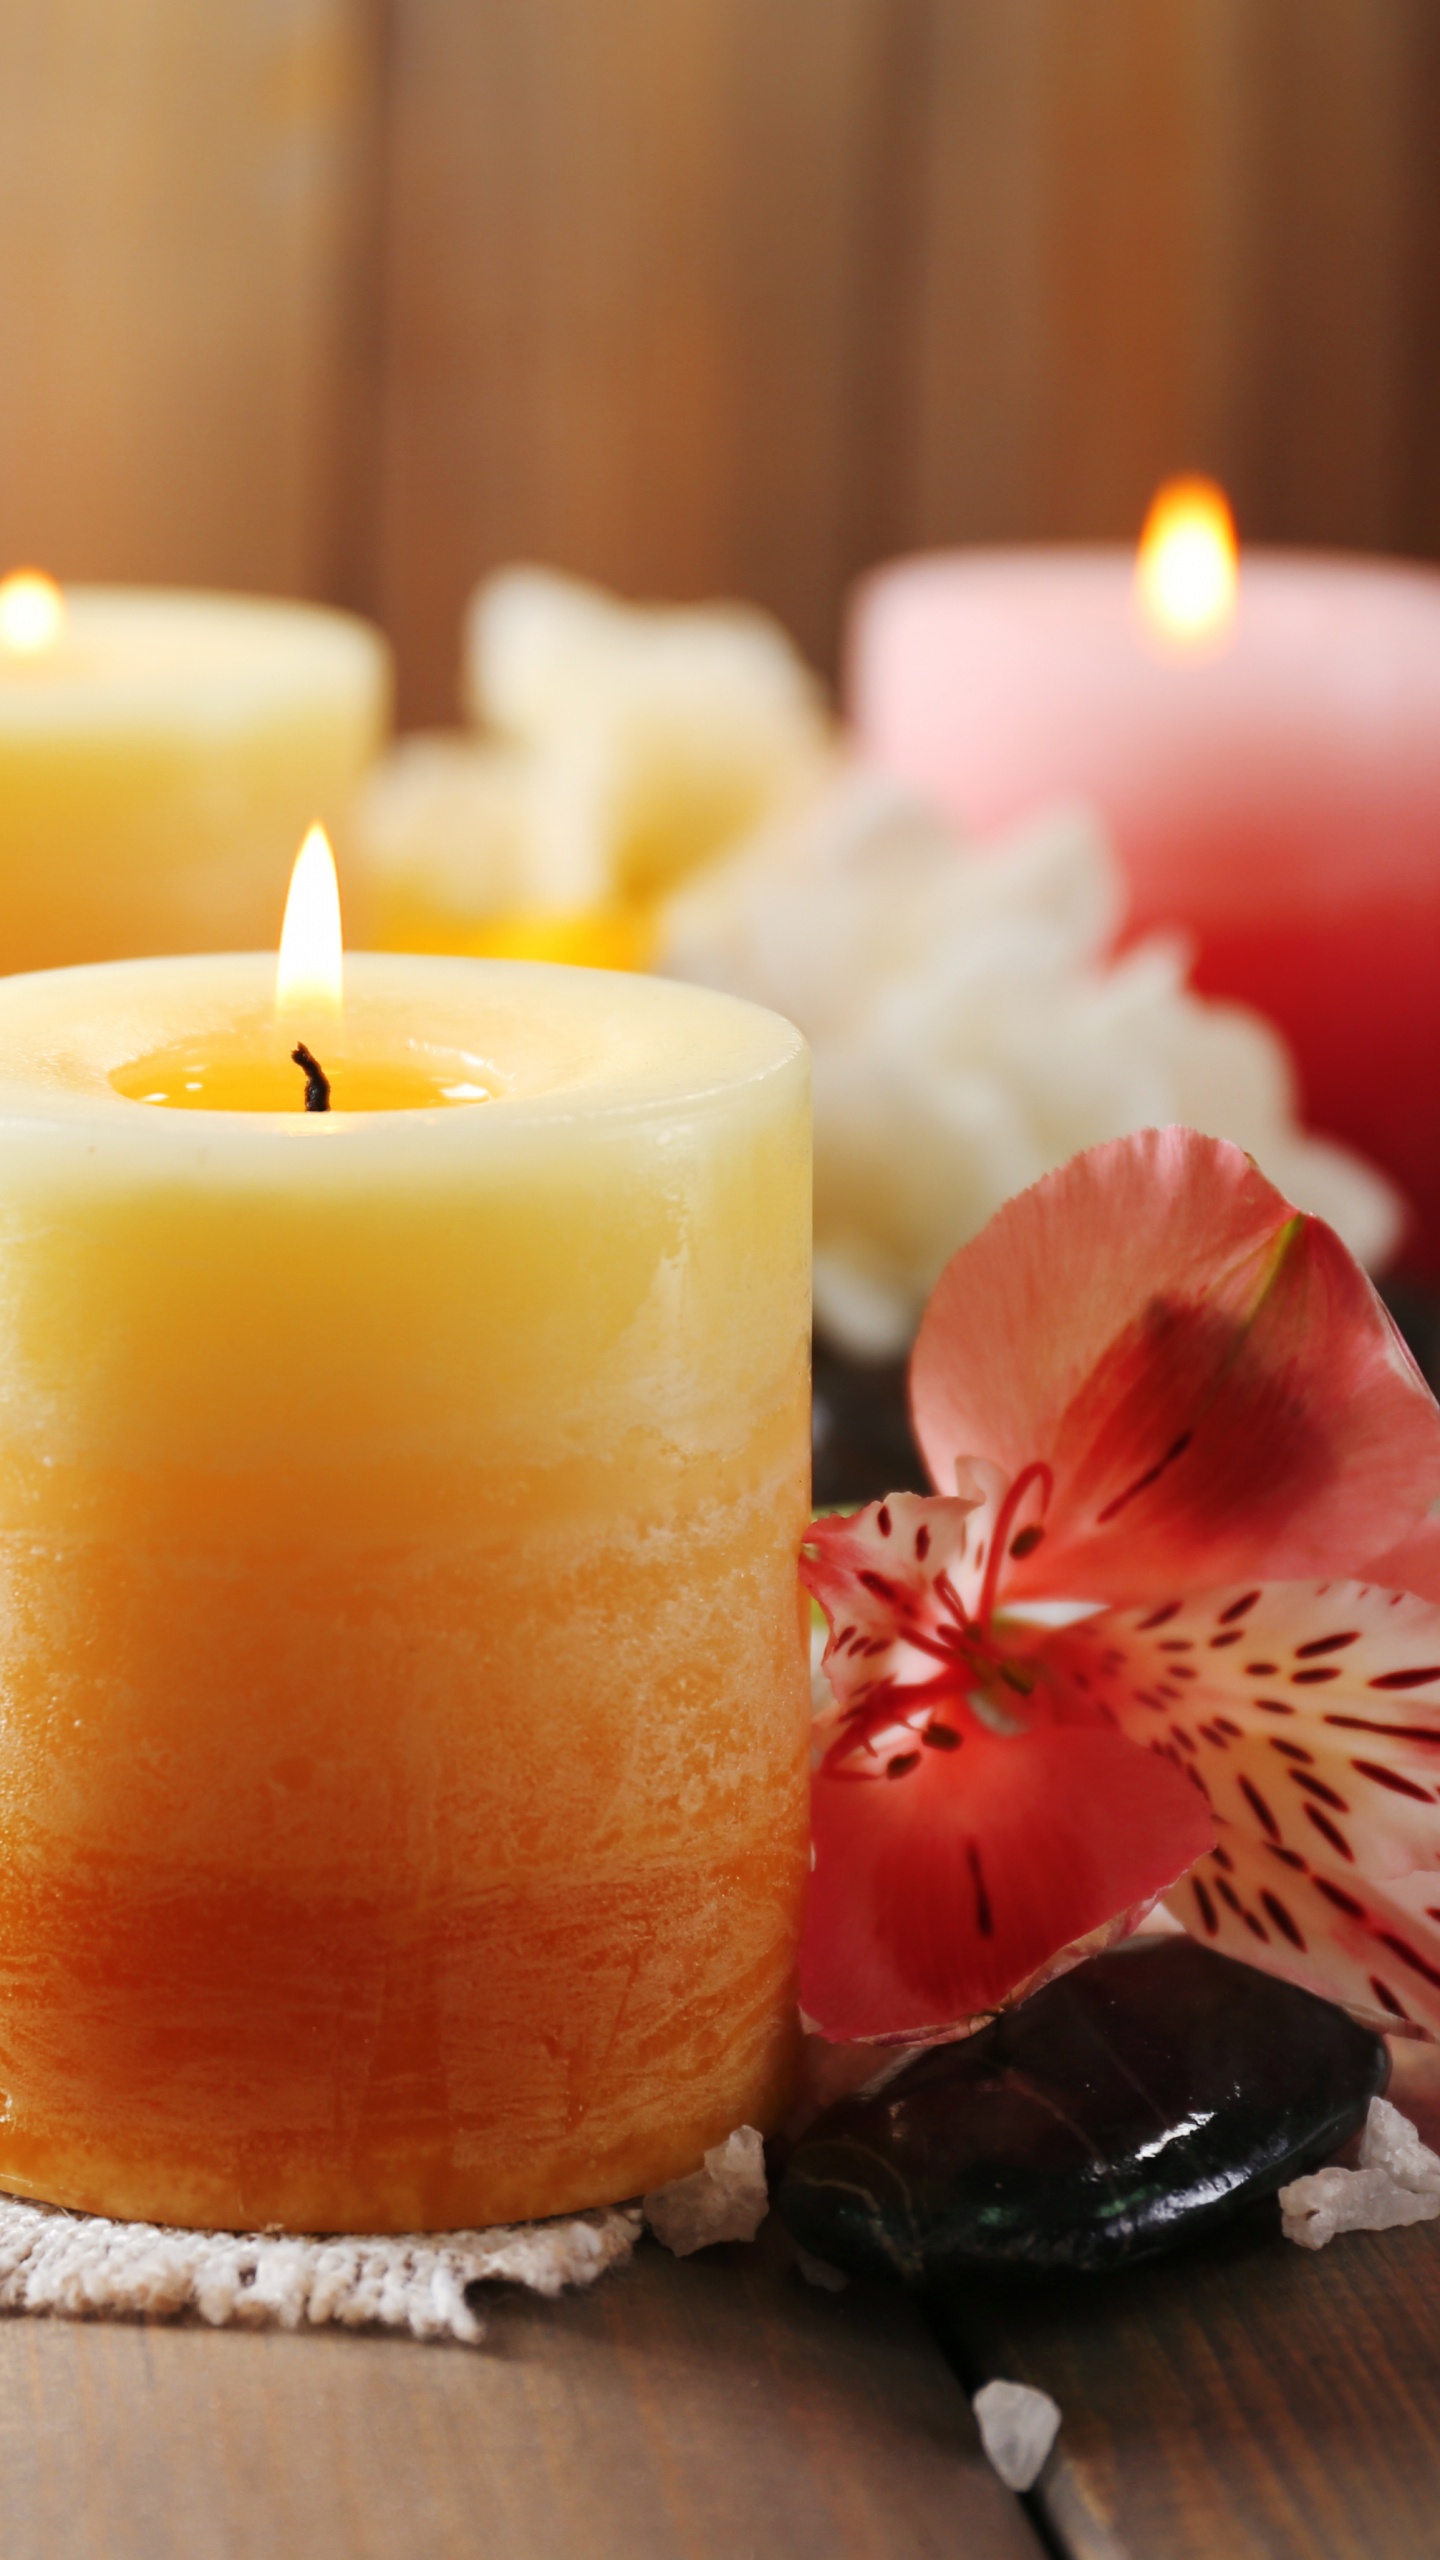 Candle, Wax, Lighting, Yellow, Flameless Candle. Wallpaper in 1440x2560 Resolution